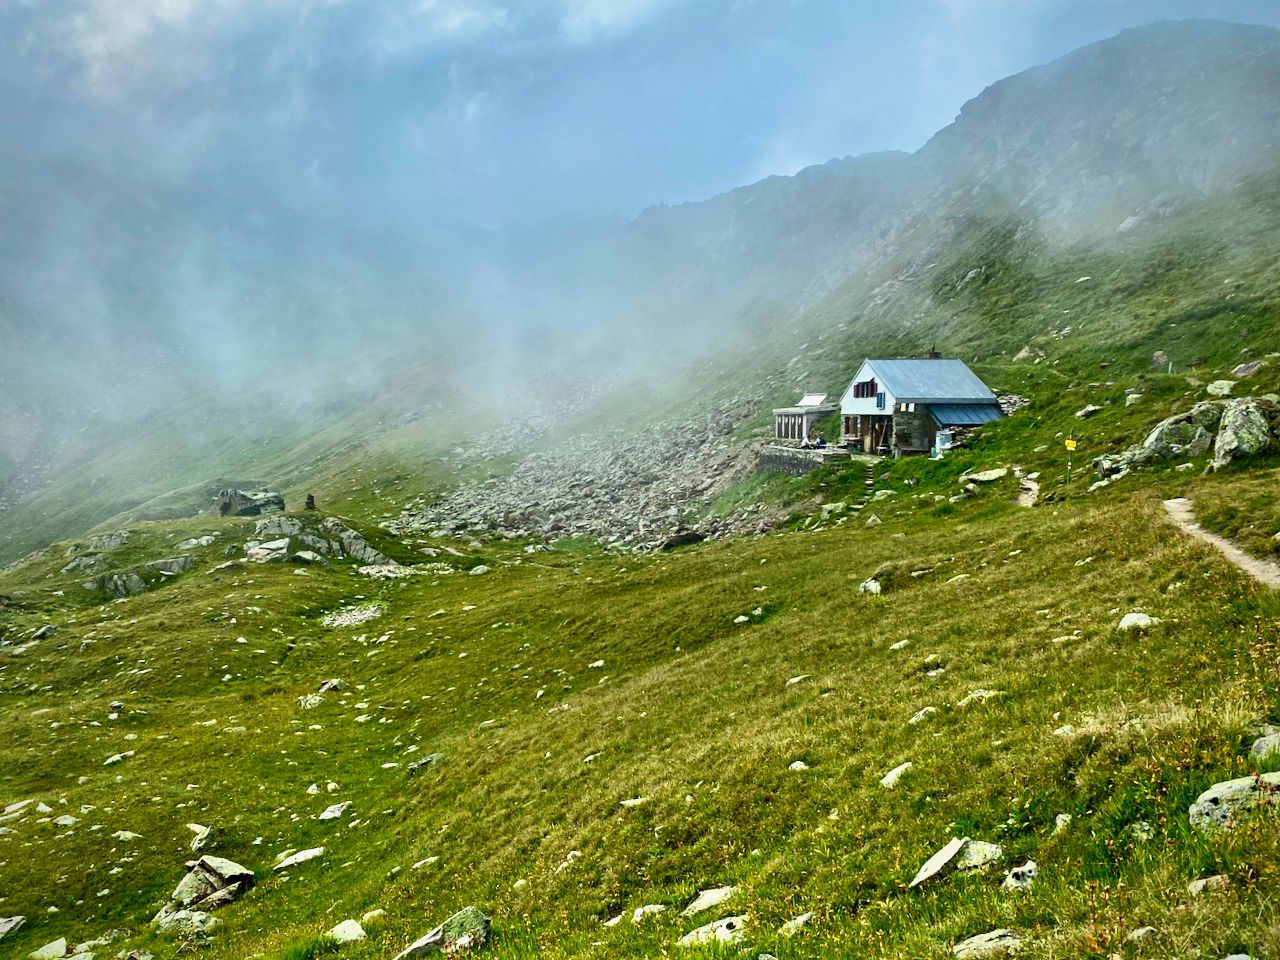 A hut nestled into the grassy side of a mountain with clouds swirling around it.